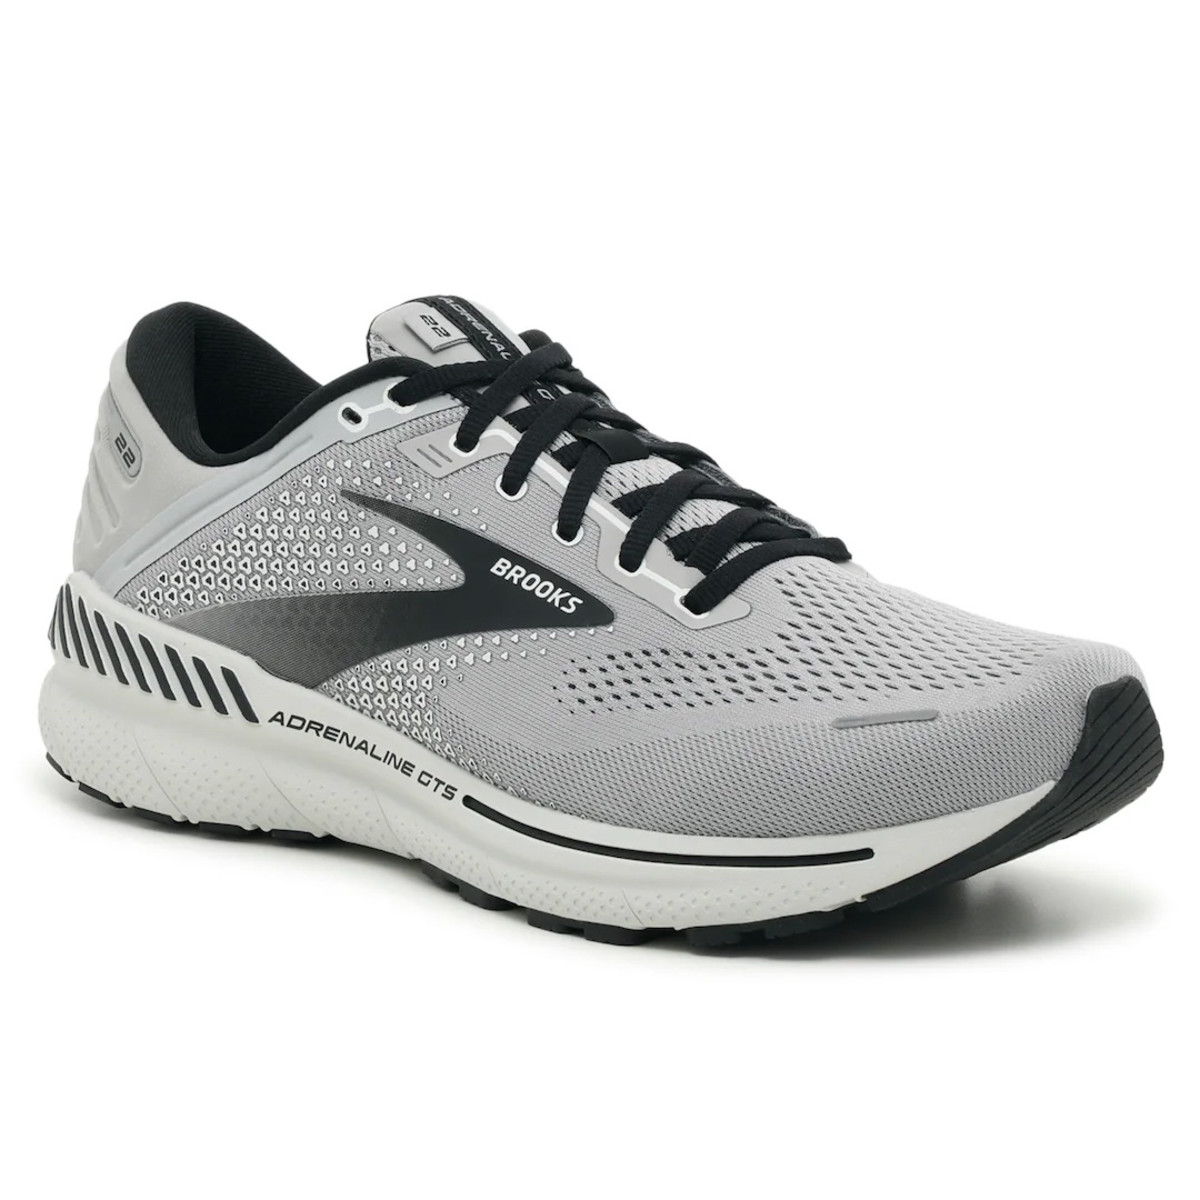 The Brooks Adrenaline GTS 22 Running Shoes Are Under $90 Now - Men's ...